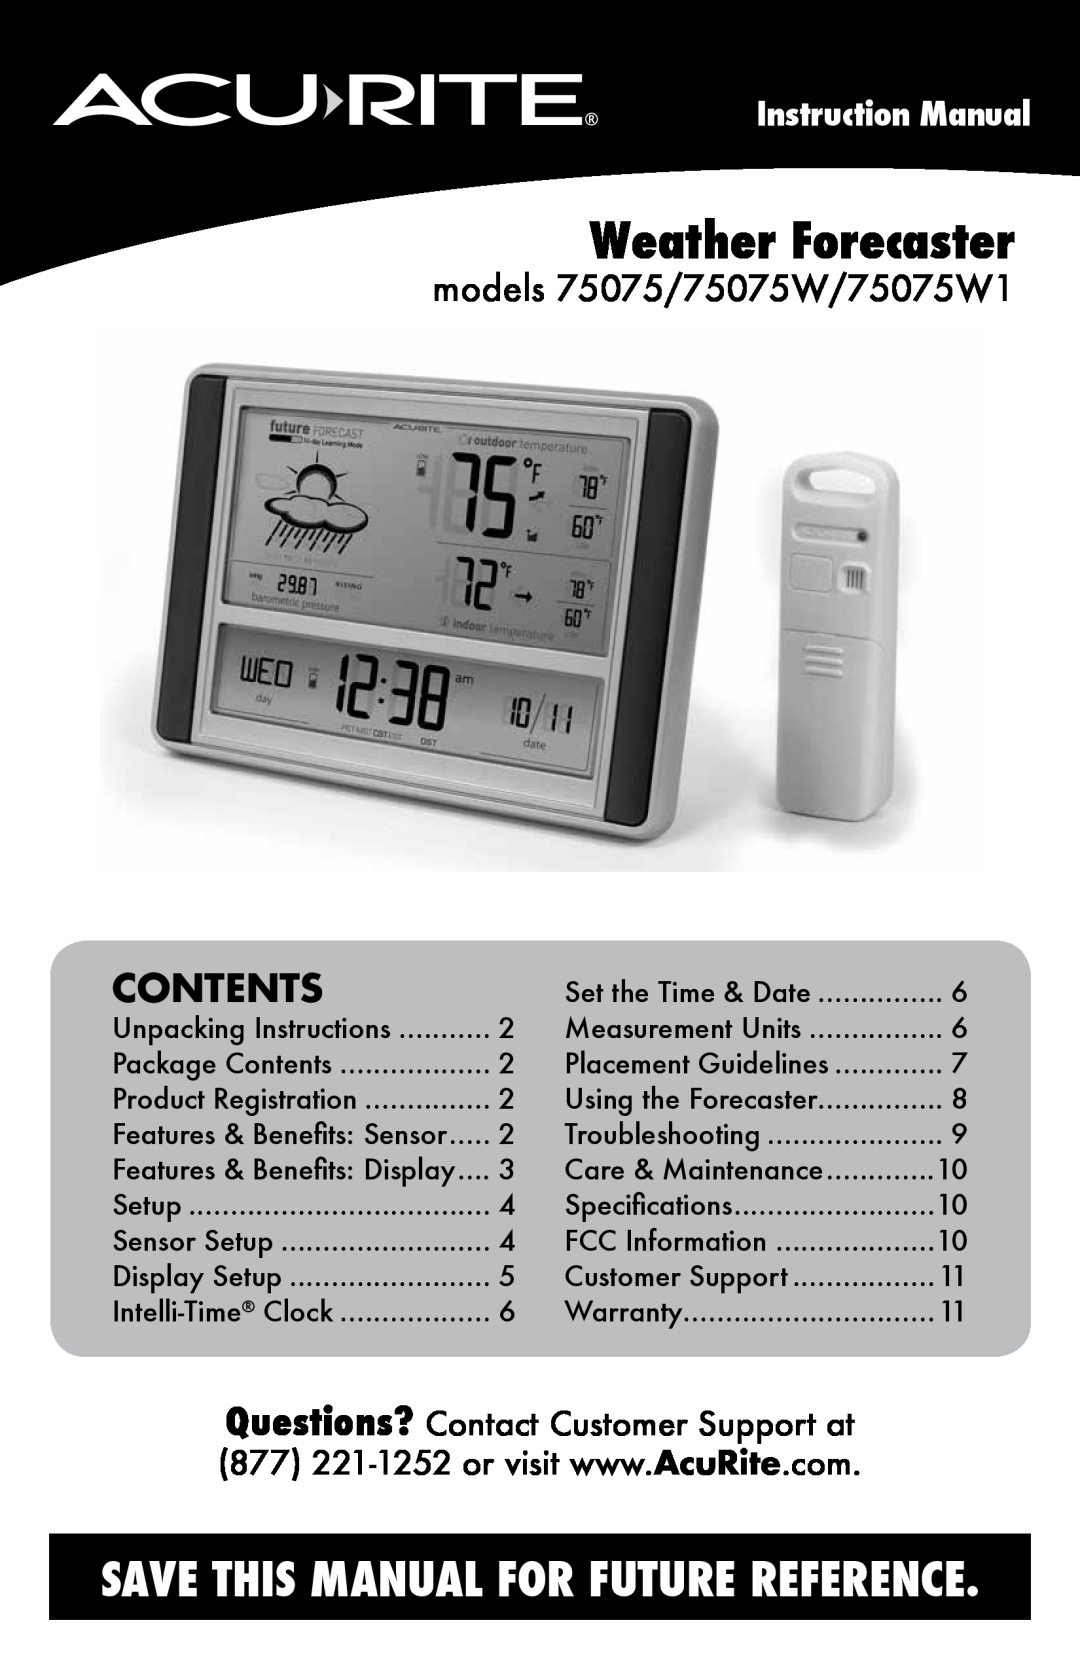 Acu-Rite instruction manual Contents, models 75075/75075W/75075W1, Weather Forecaster 